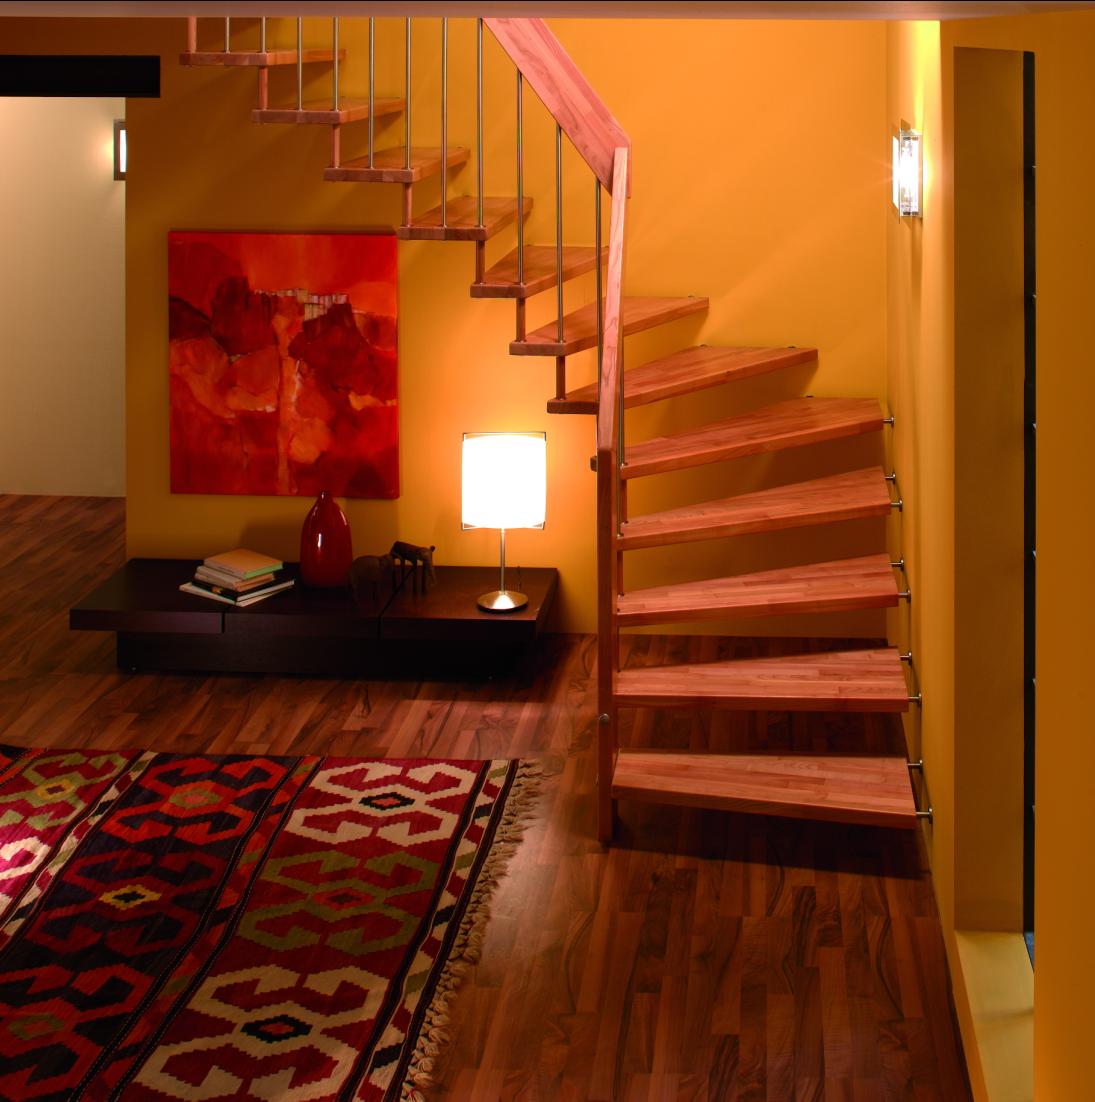 Staircase decorating ideas with modern design - My ...